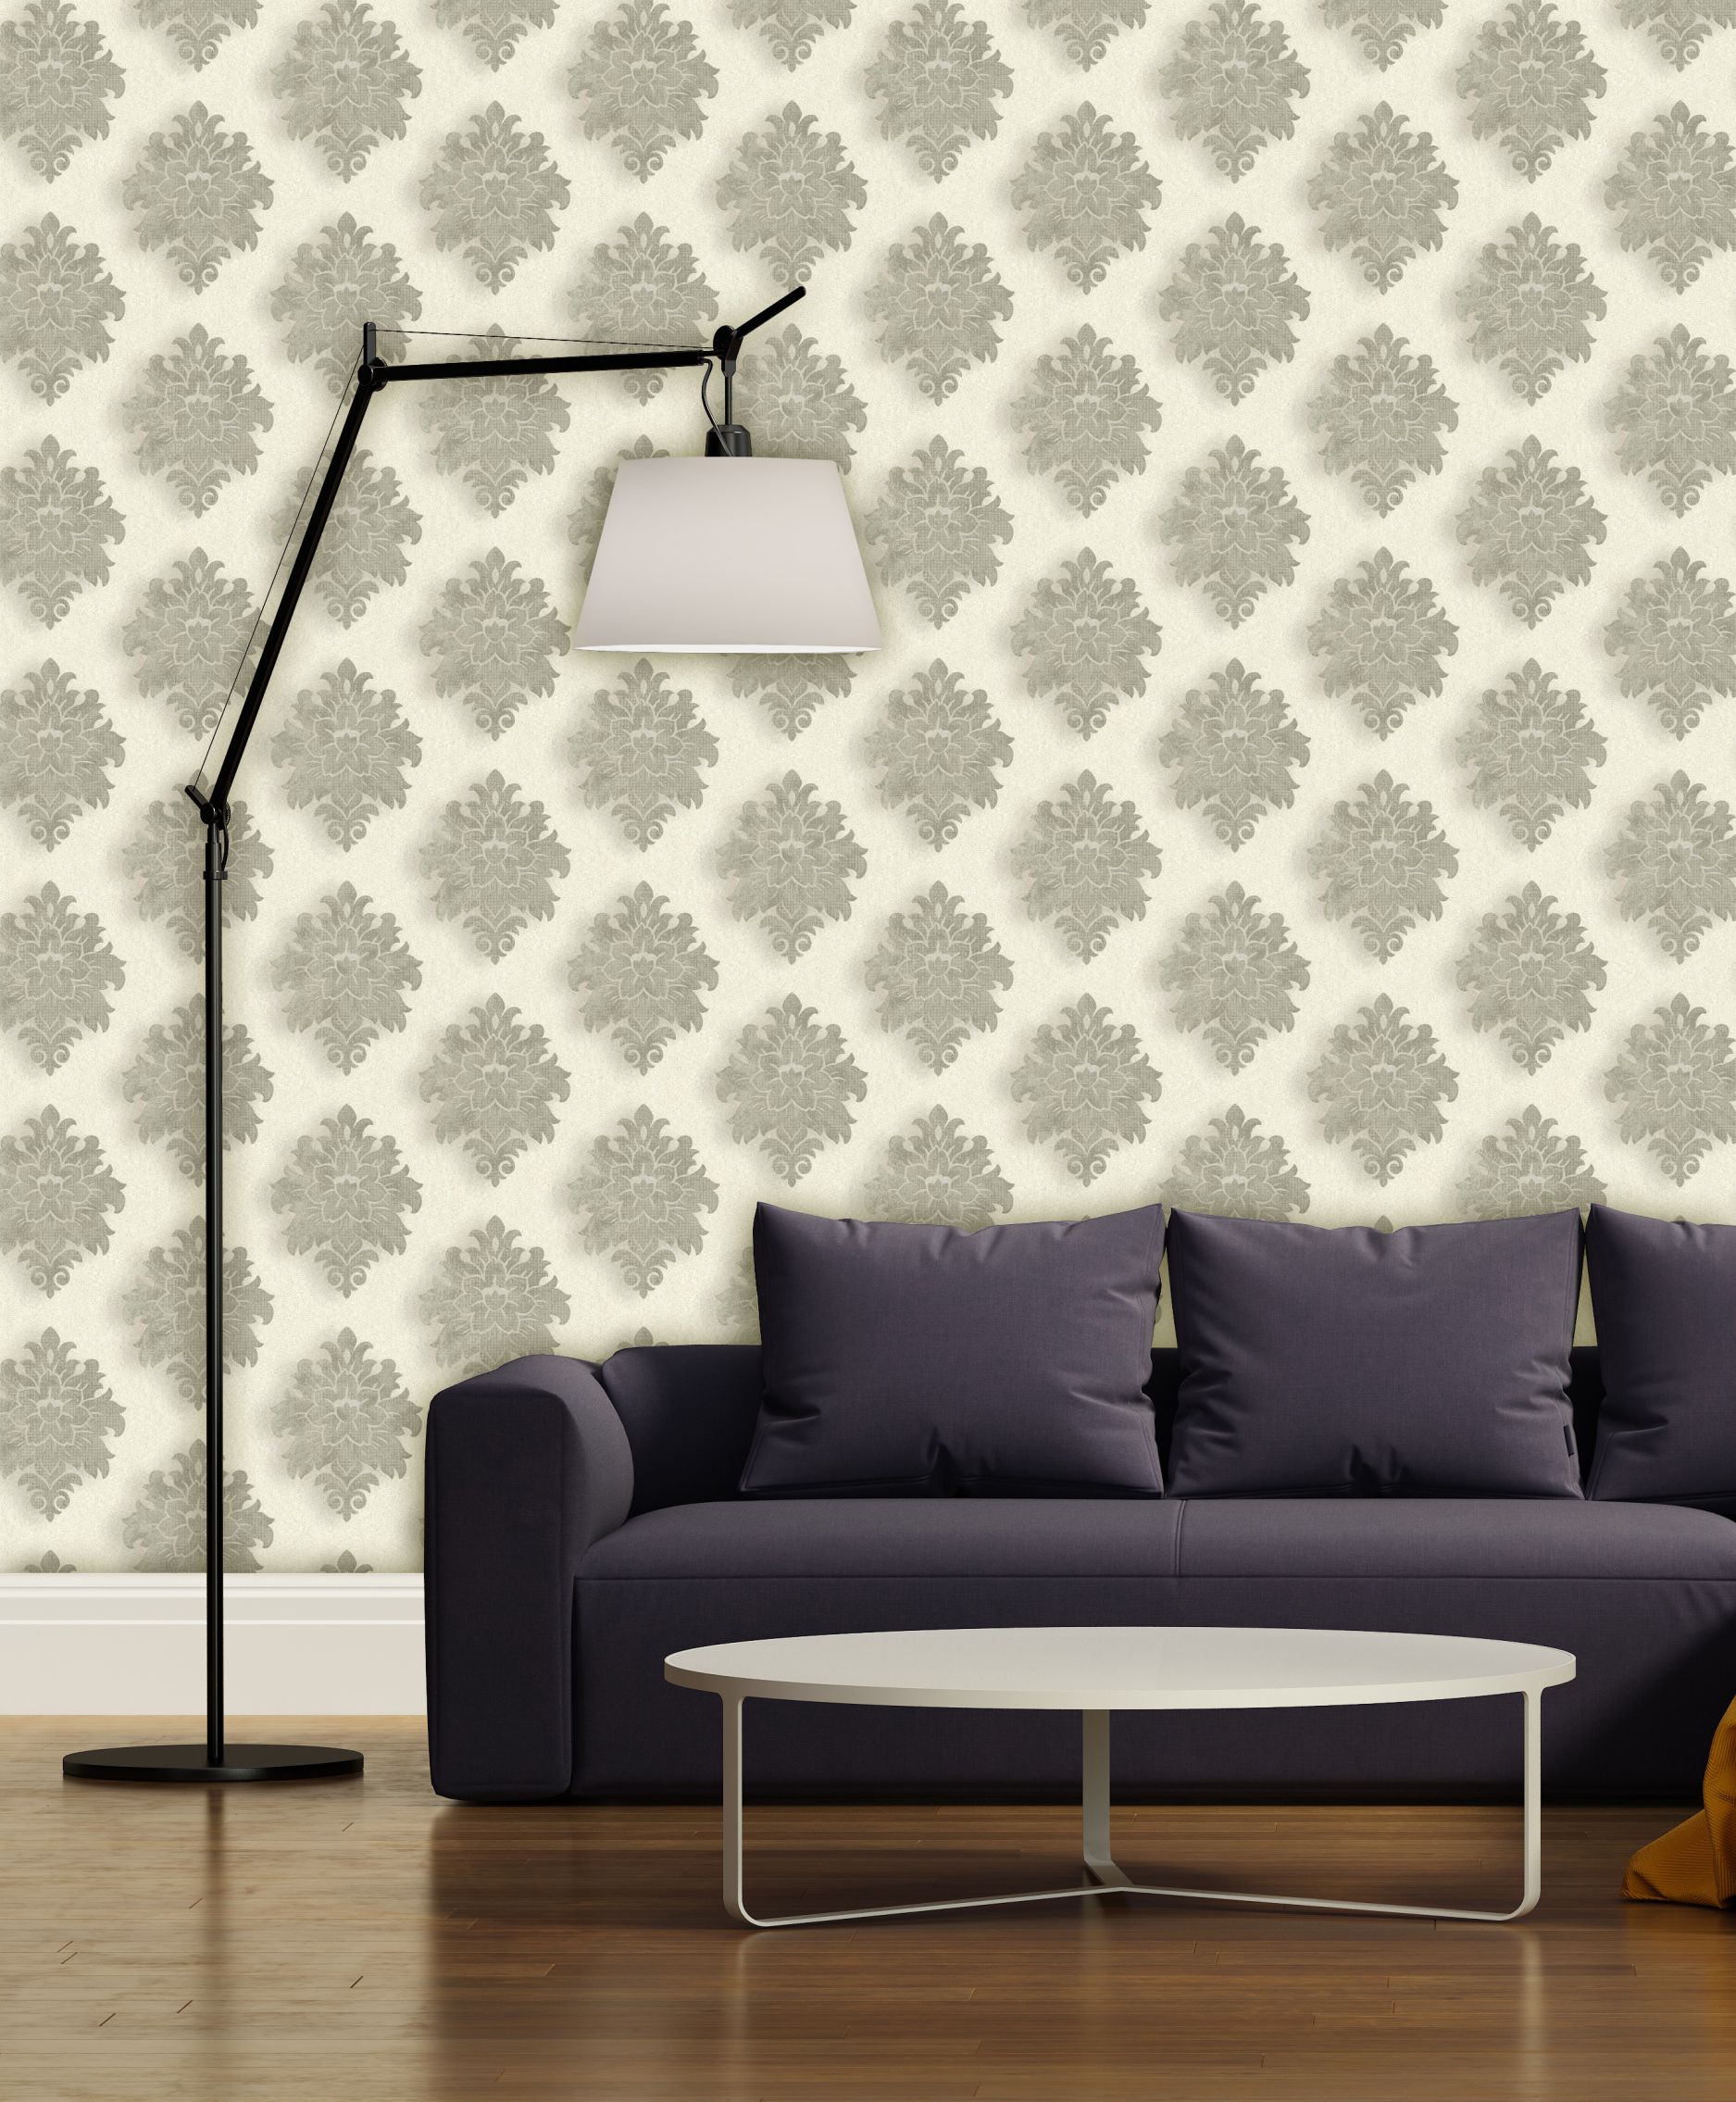 Buy Gatih Checks WallPapers SelfAdhesive AntiMold Abstract 3D Sticker   200 x 60 cms  Online at Best Price in India  Snapdeal